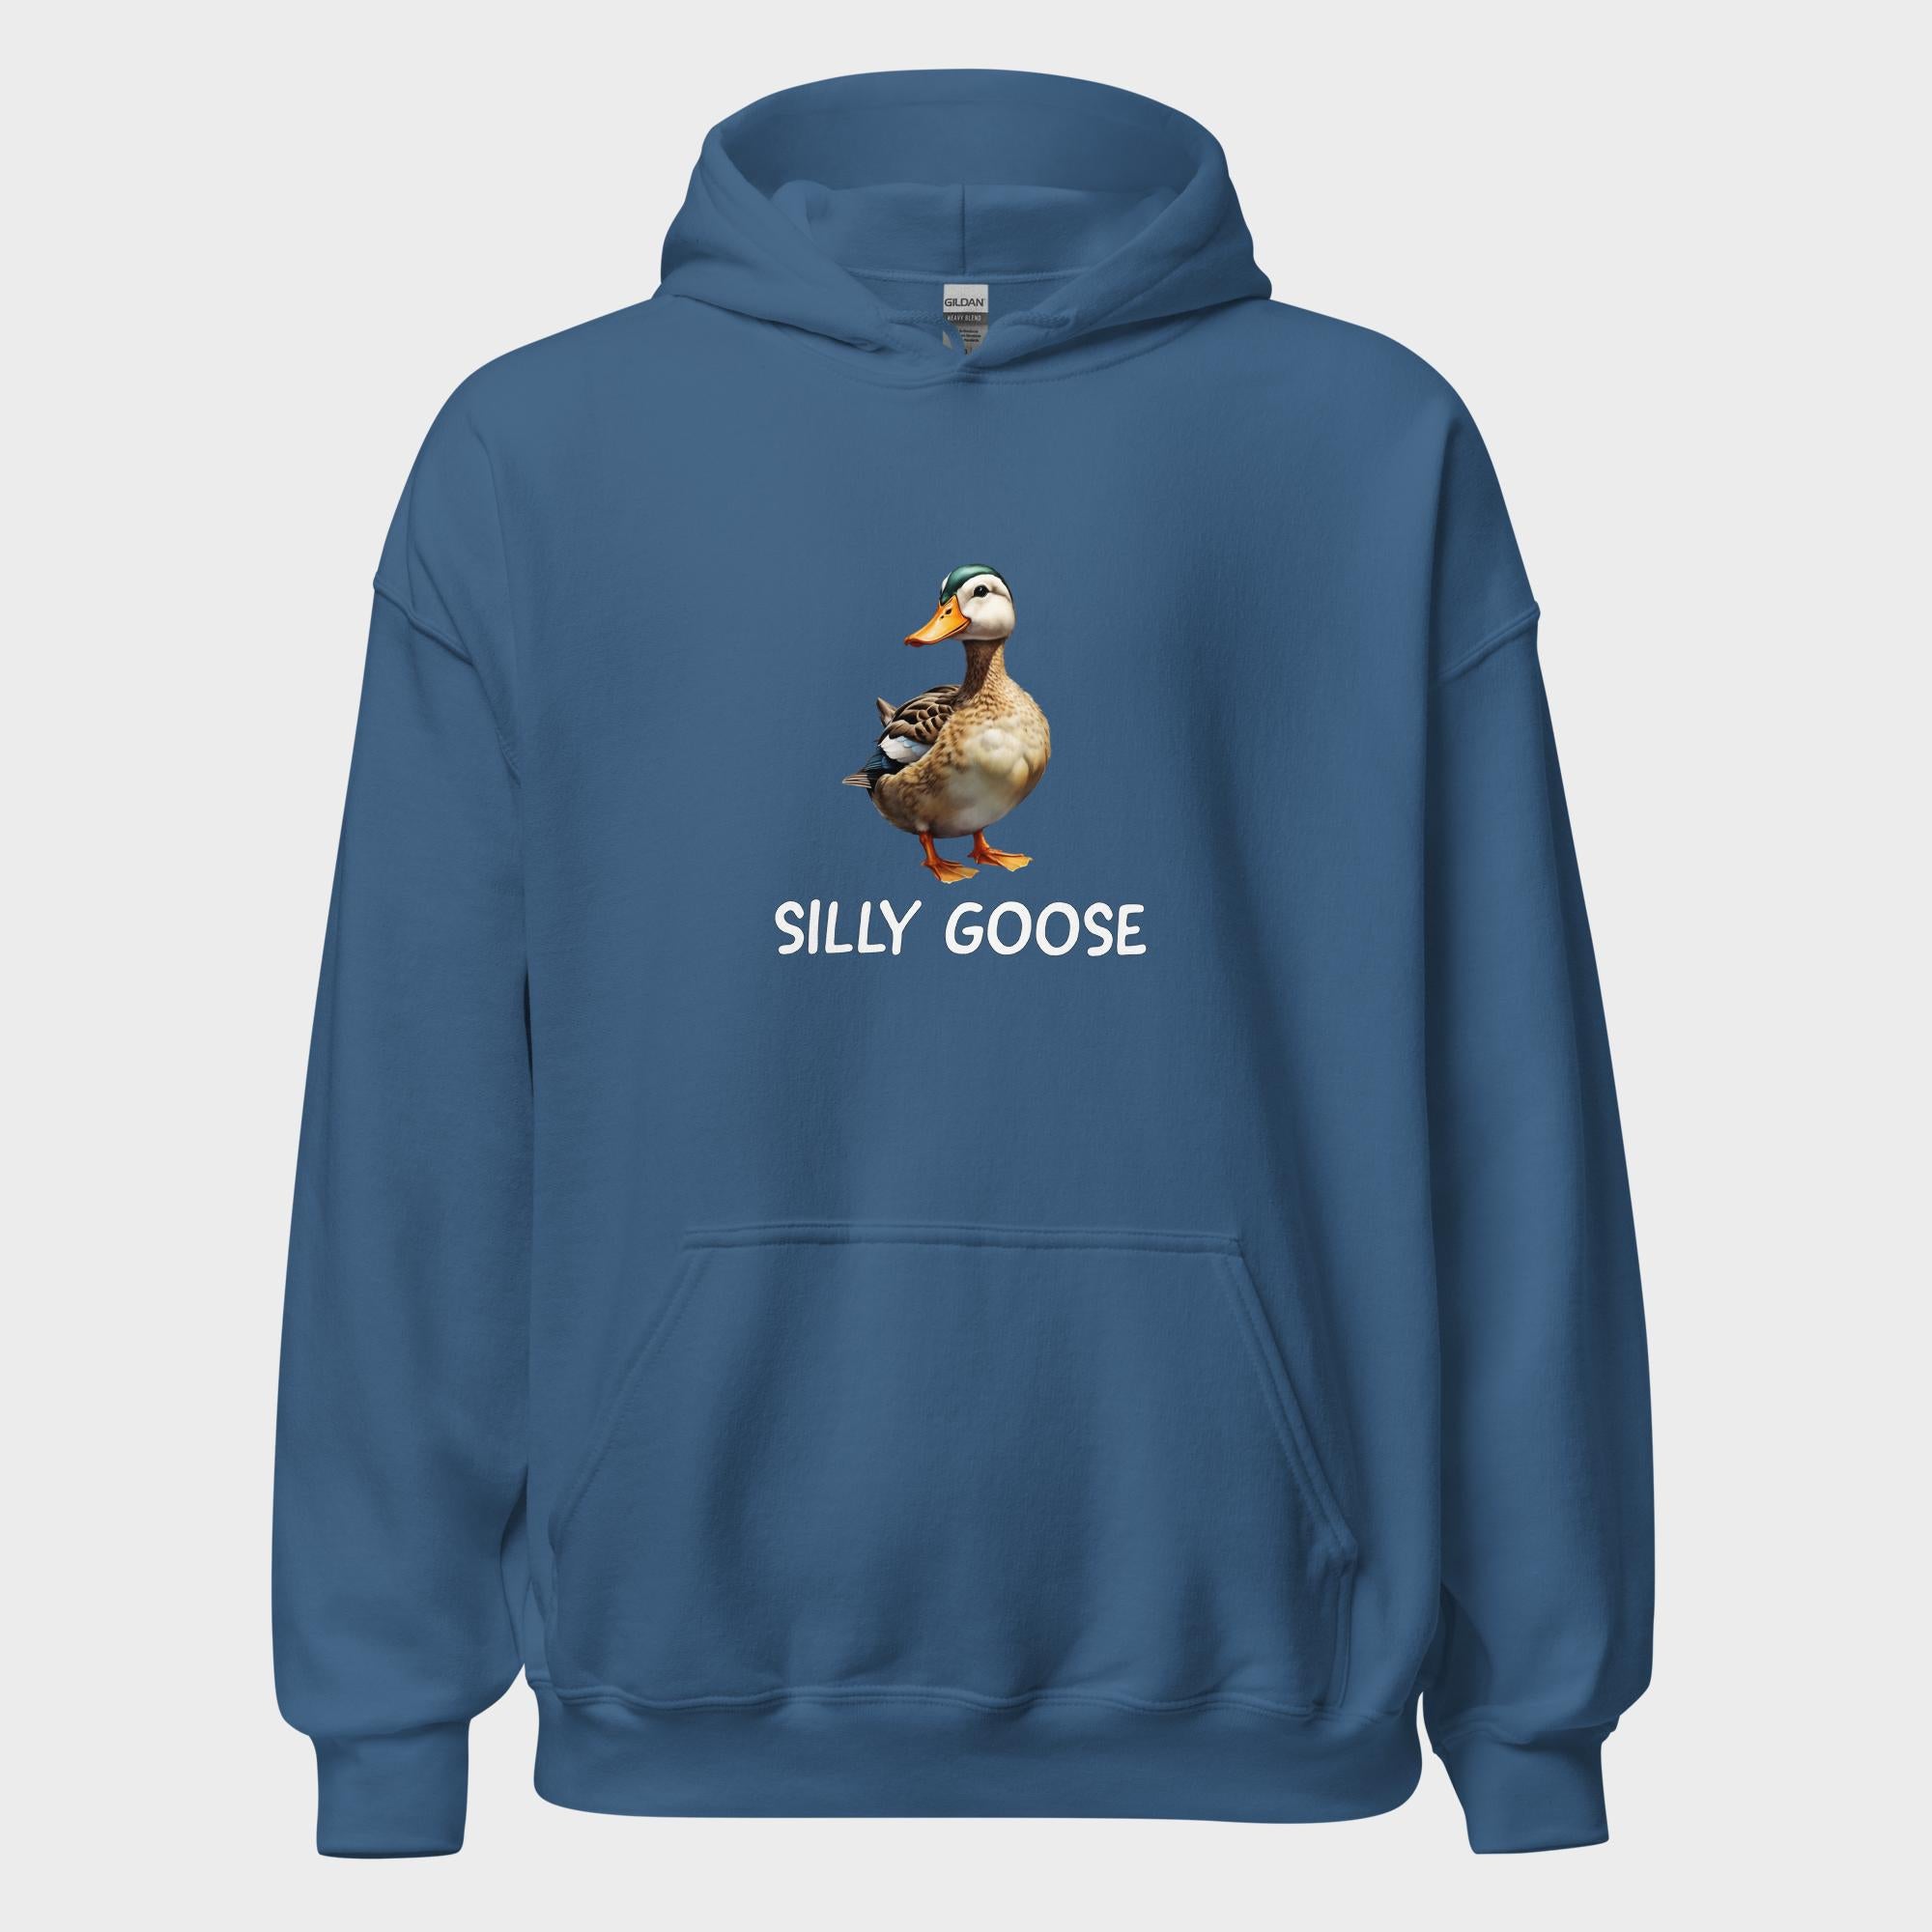 Silly Goose - Hoodie